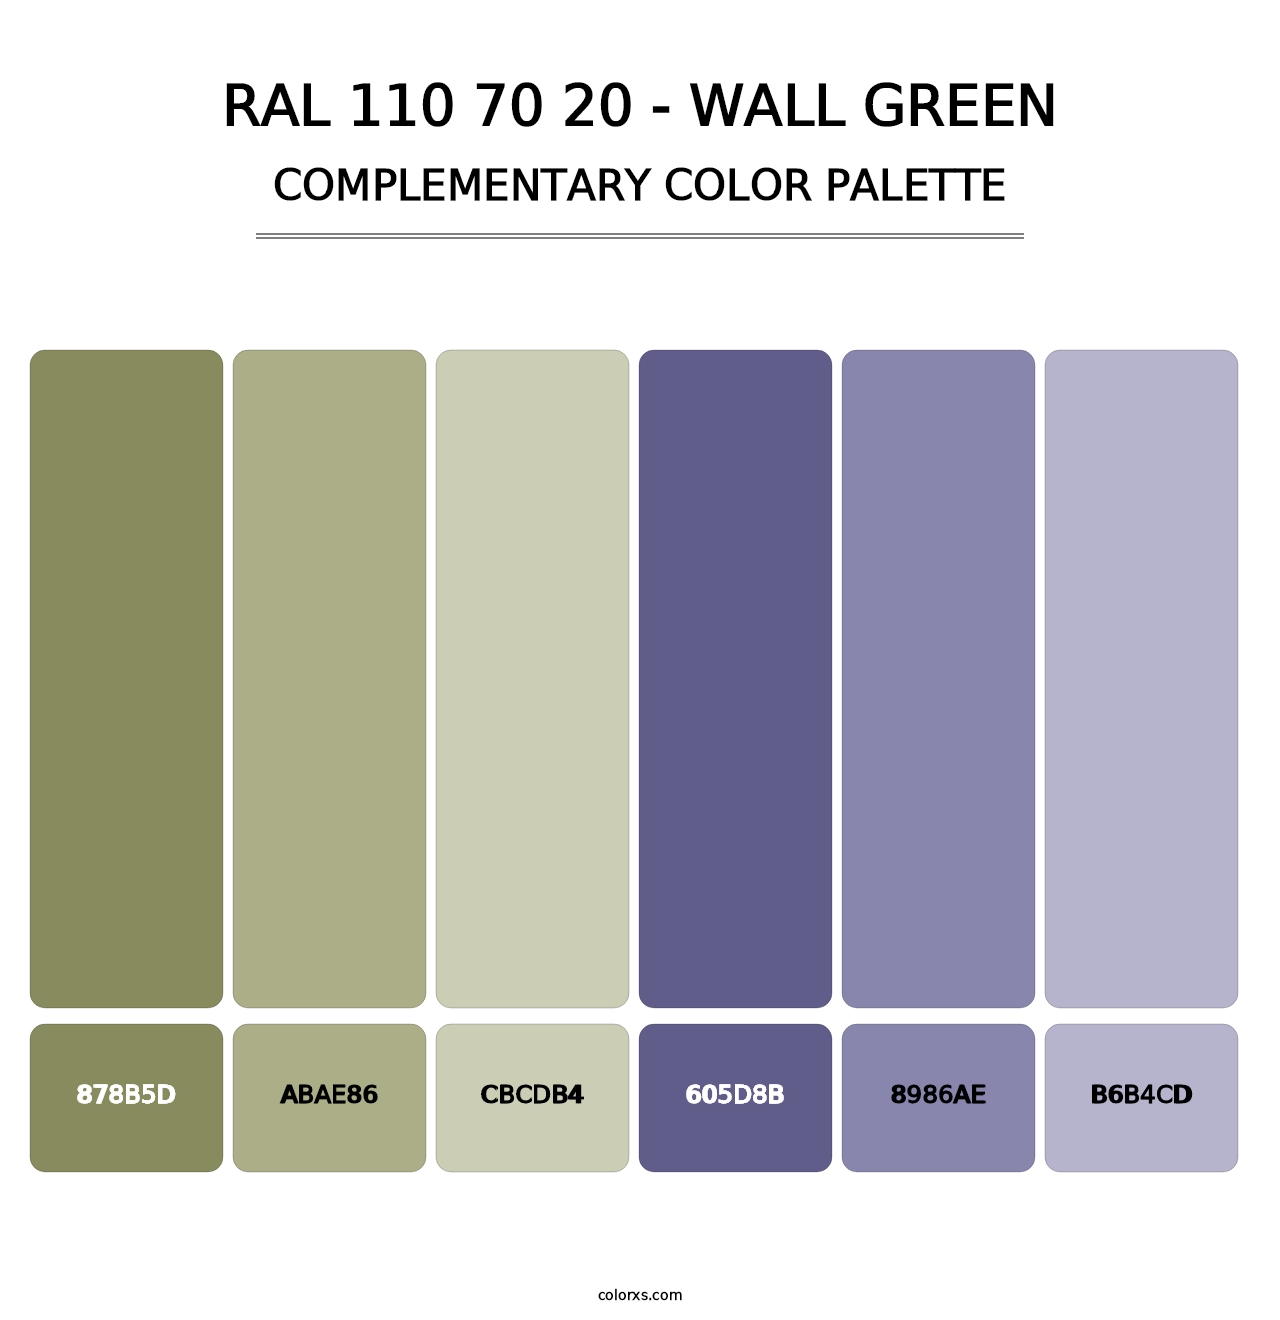 RAL 110 70 20 - Wall Green - Complementary Color Palette